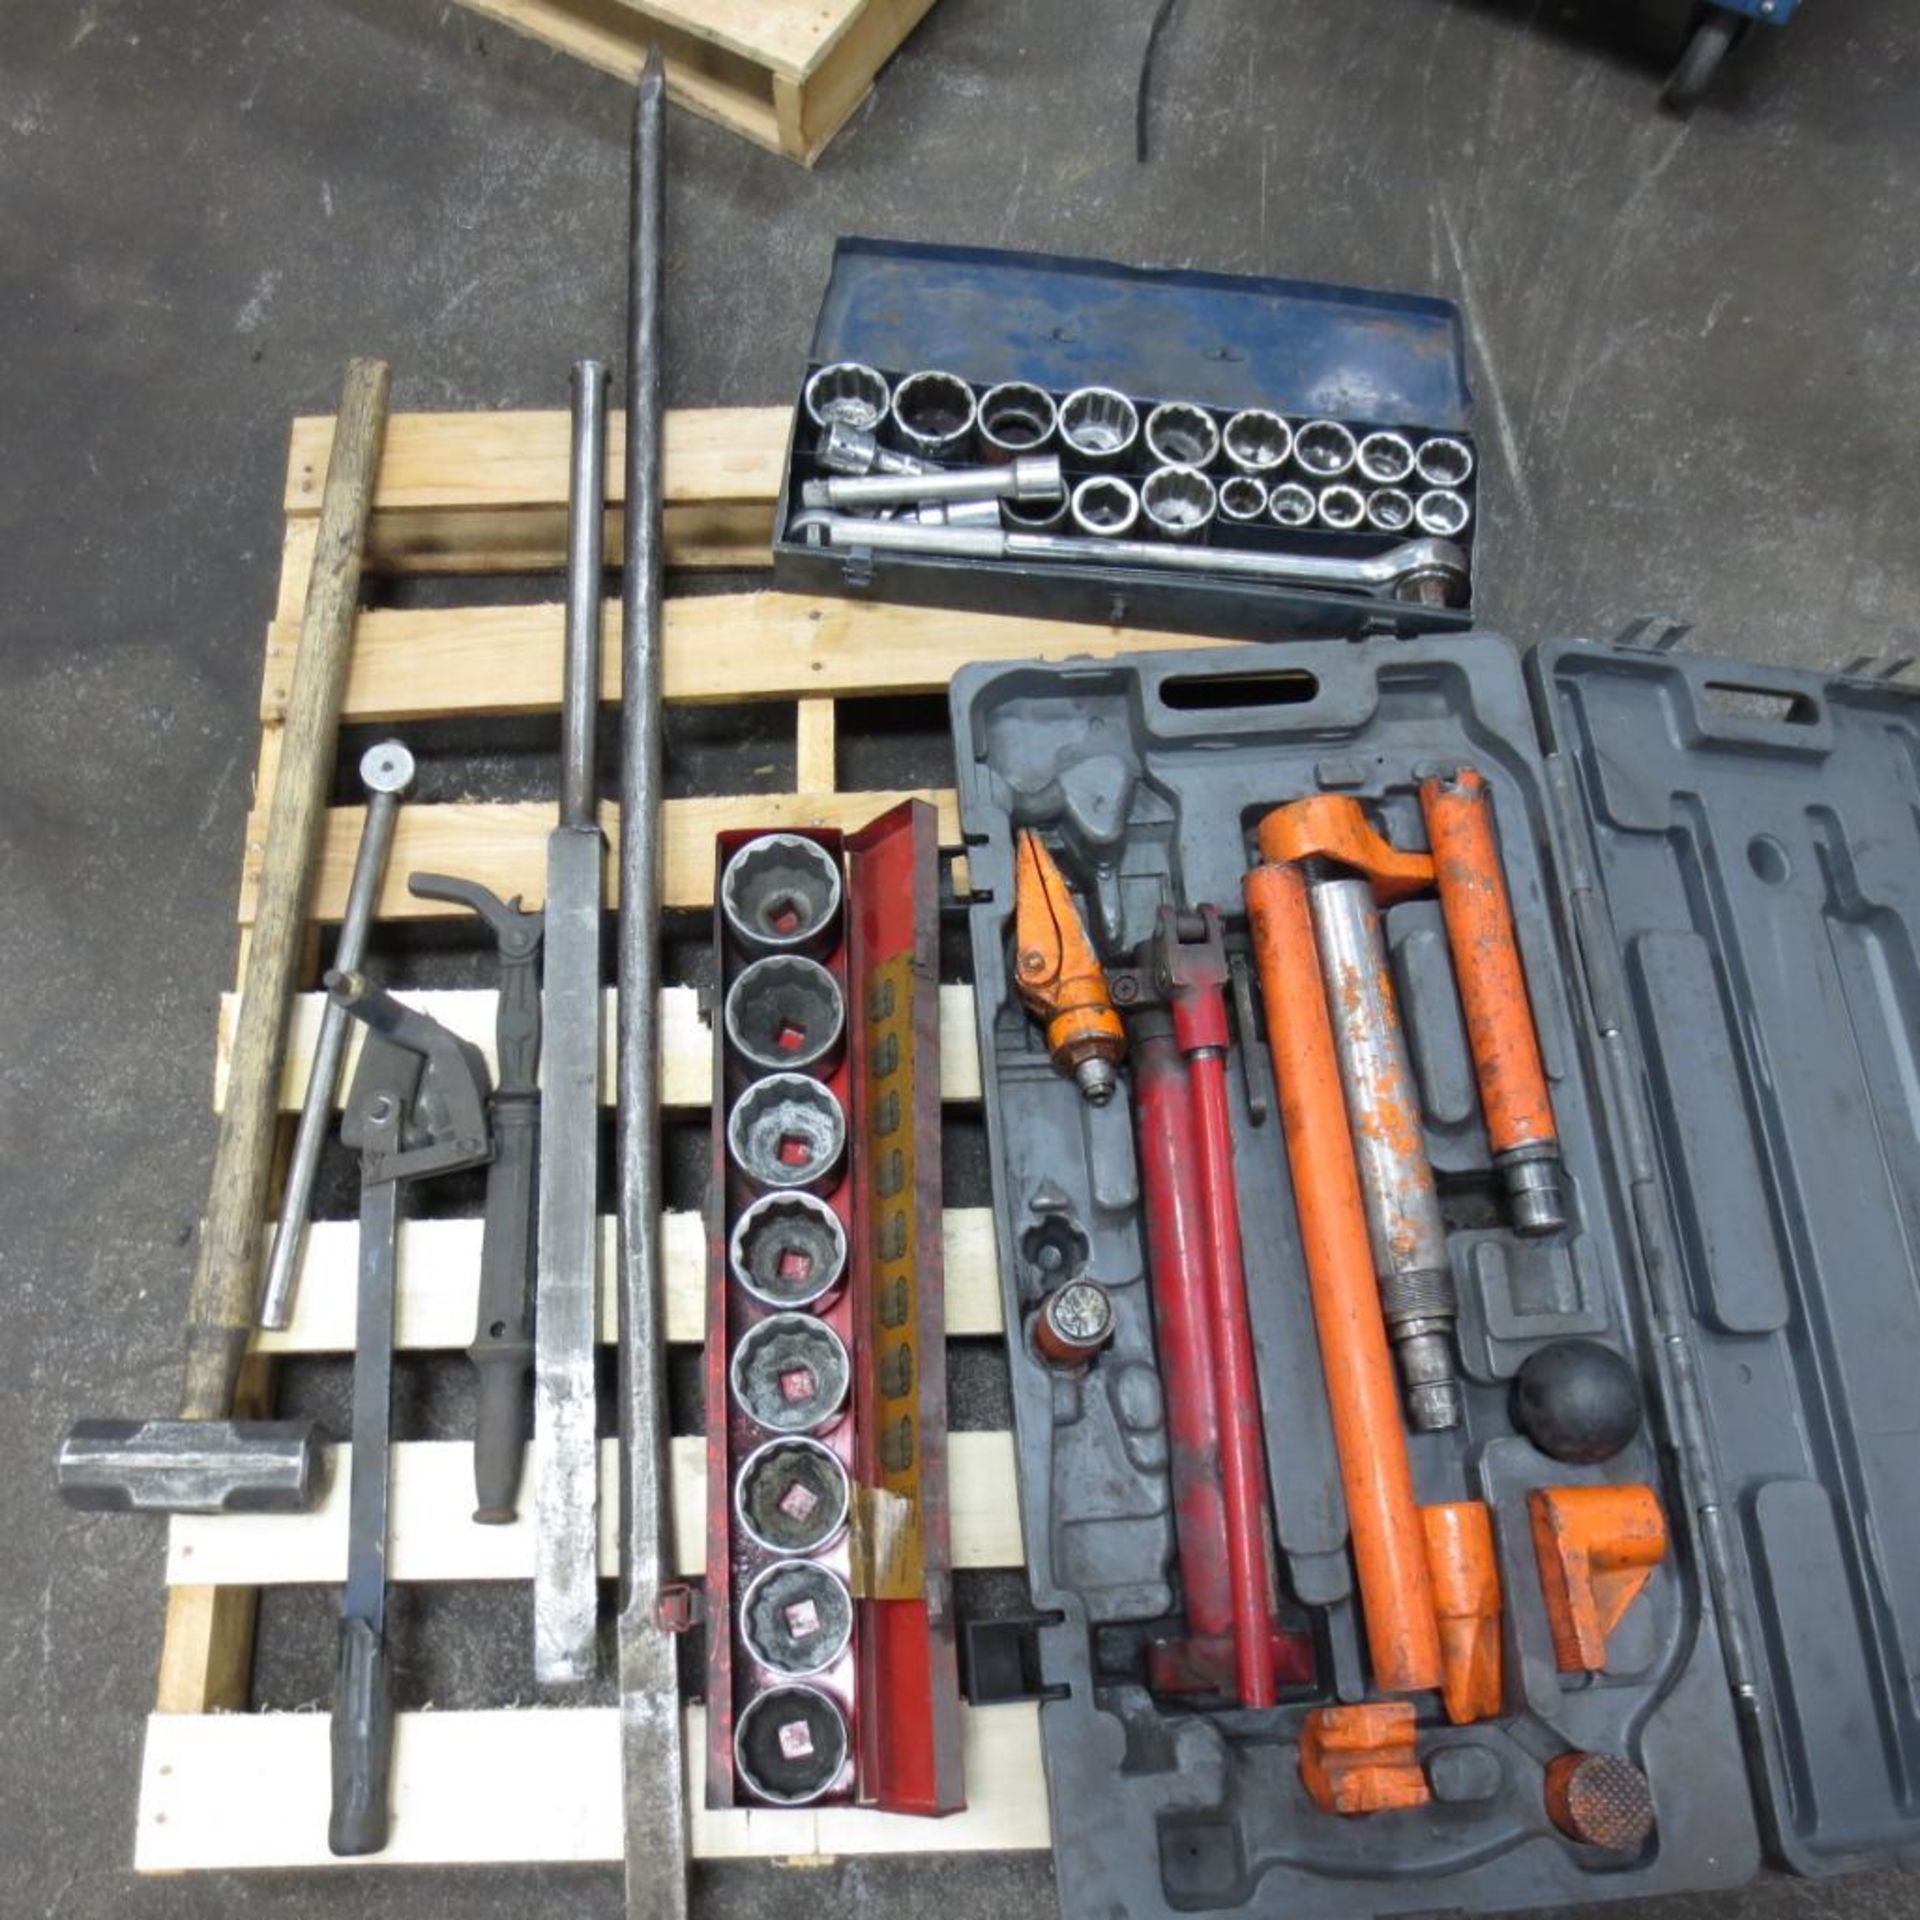 Skid with 10 Ton Portable Puller Kit, Tube Cutter, Socket and Socket Set ( Loc. Greenville, IL )